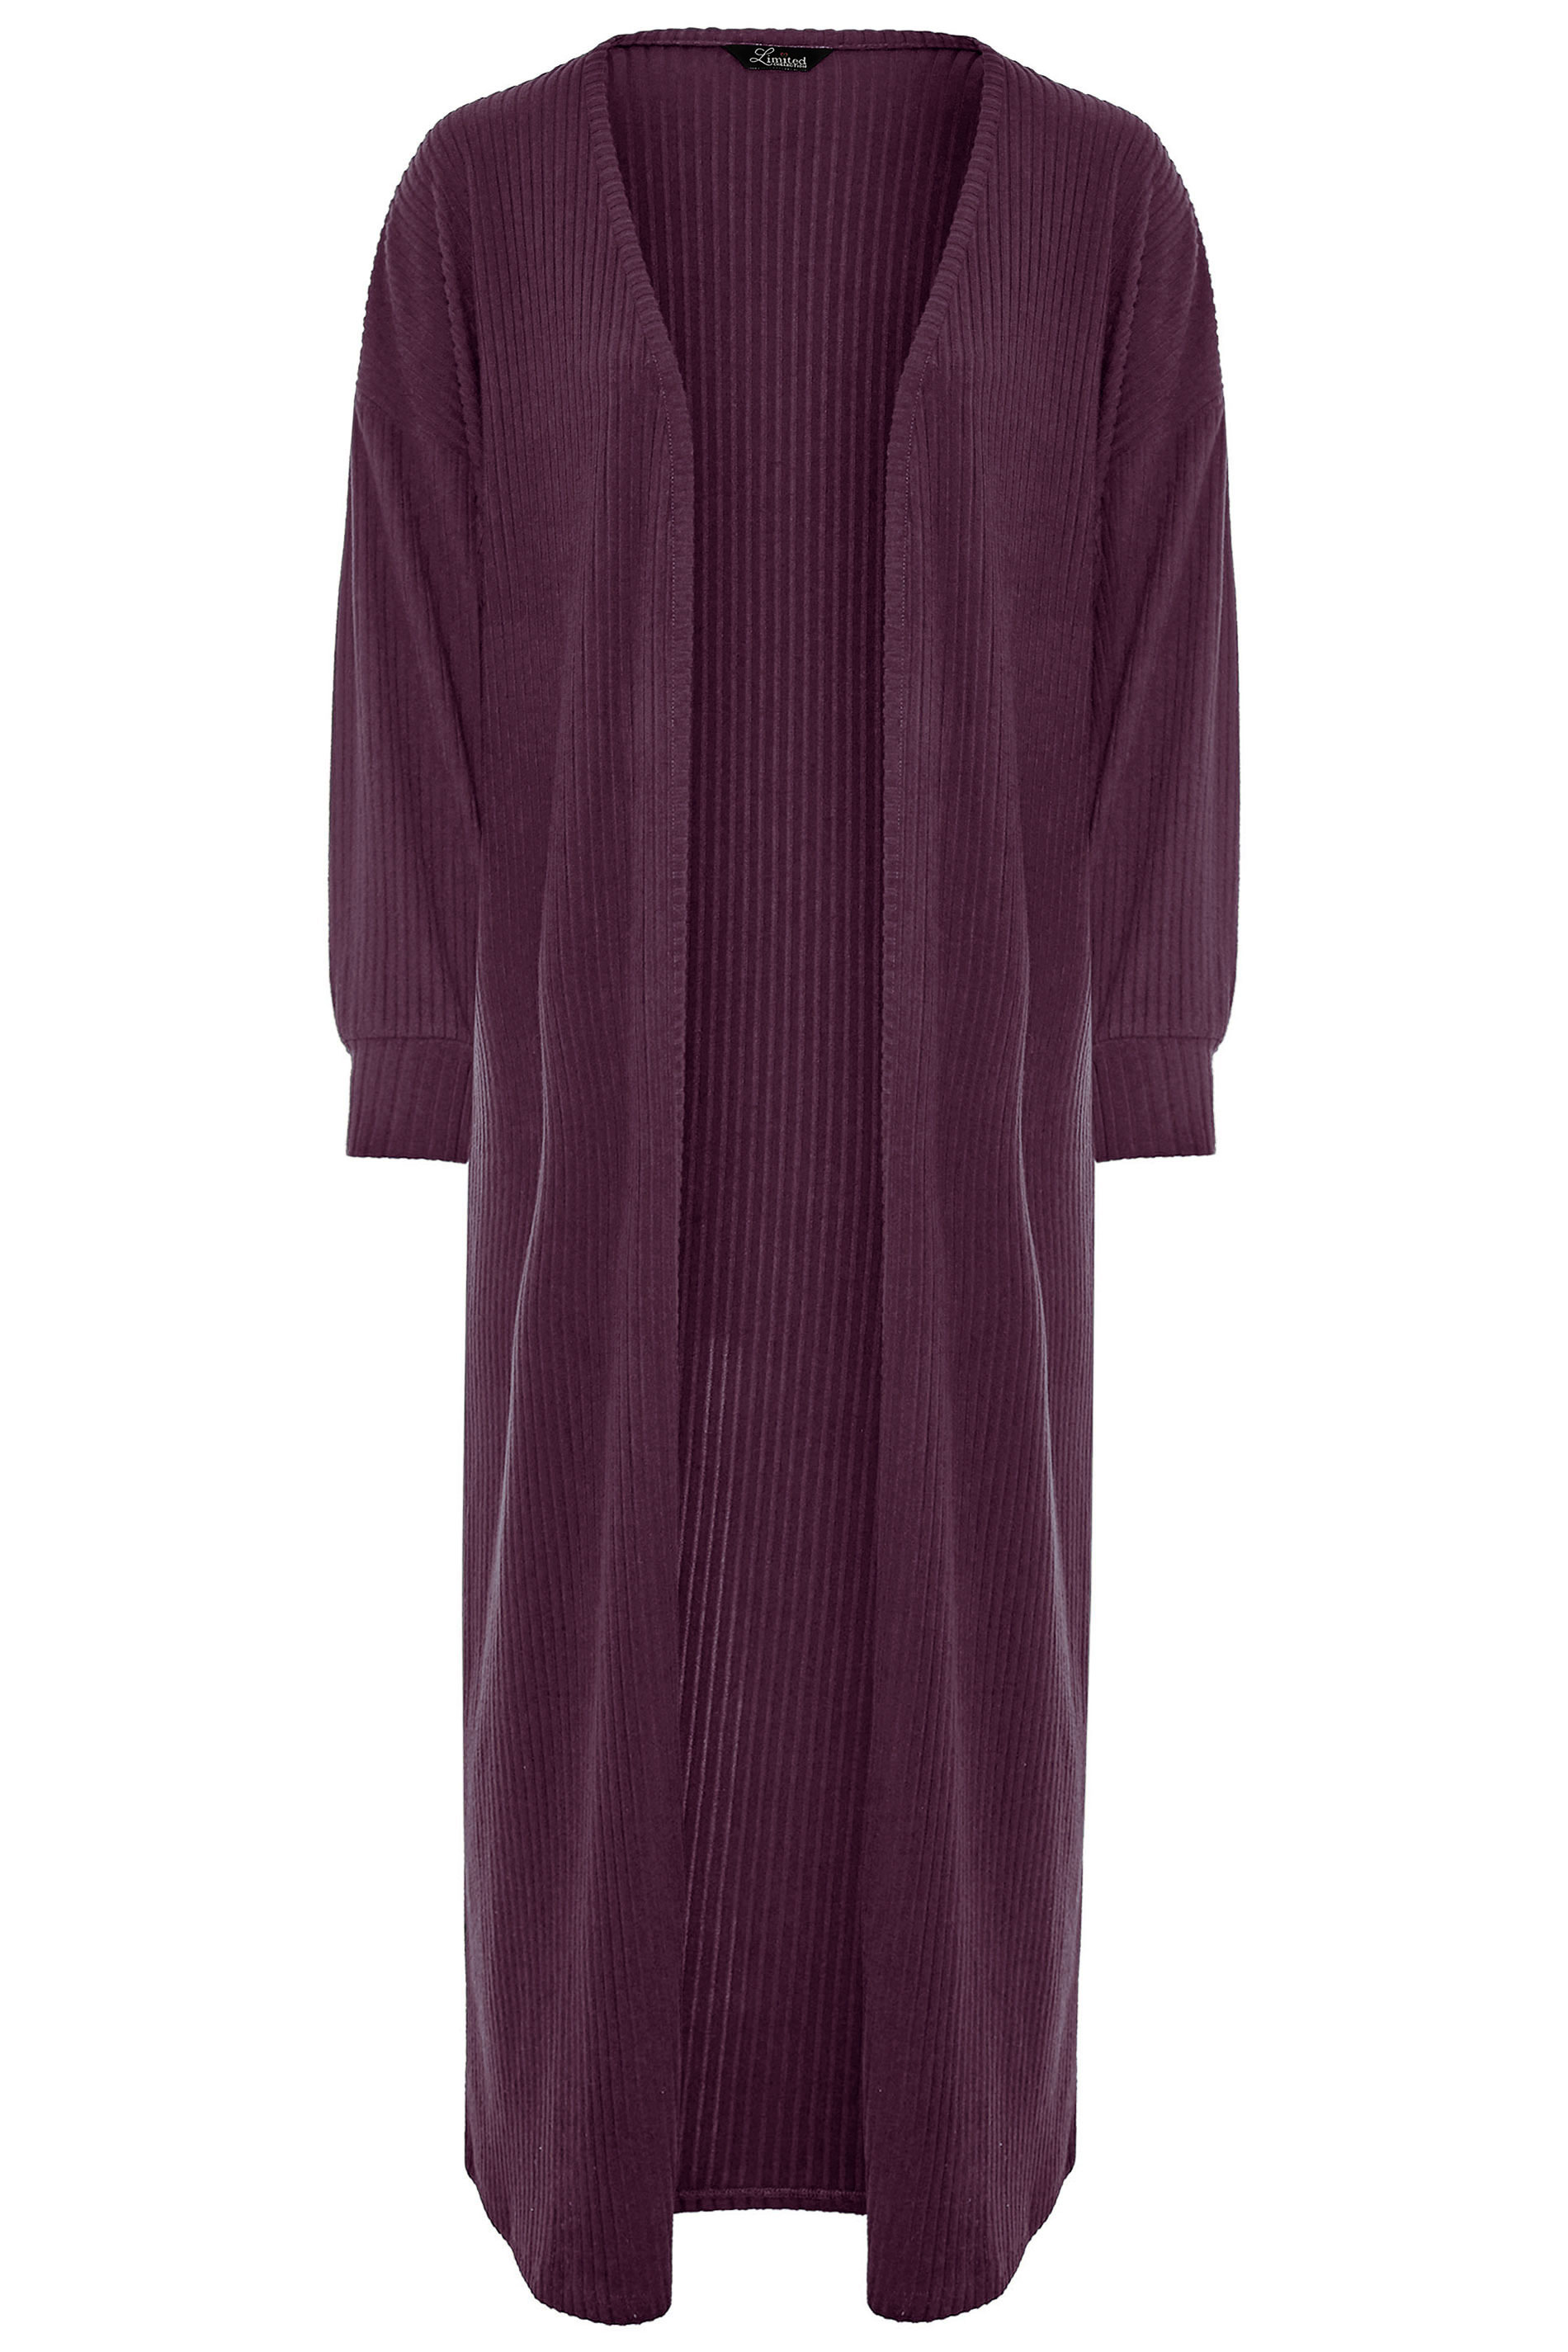 Plus Size LIMITED COLLECTION Plum Ribbed Long Cardigan | Yours Clothing